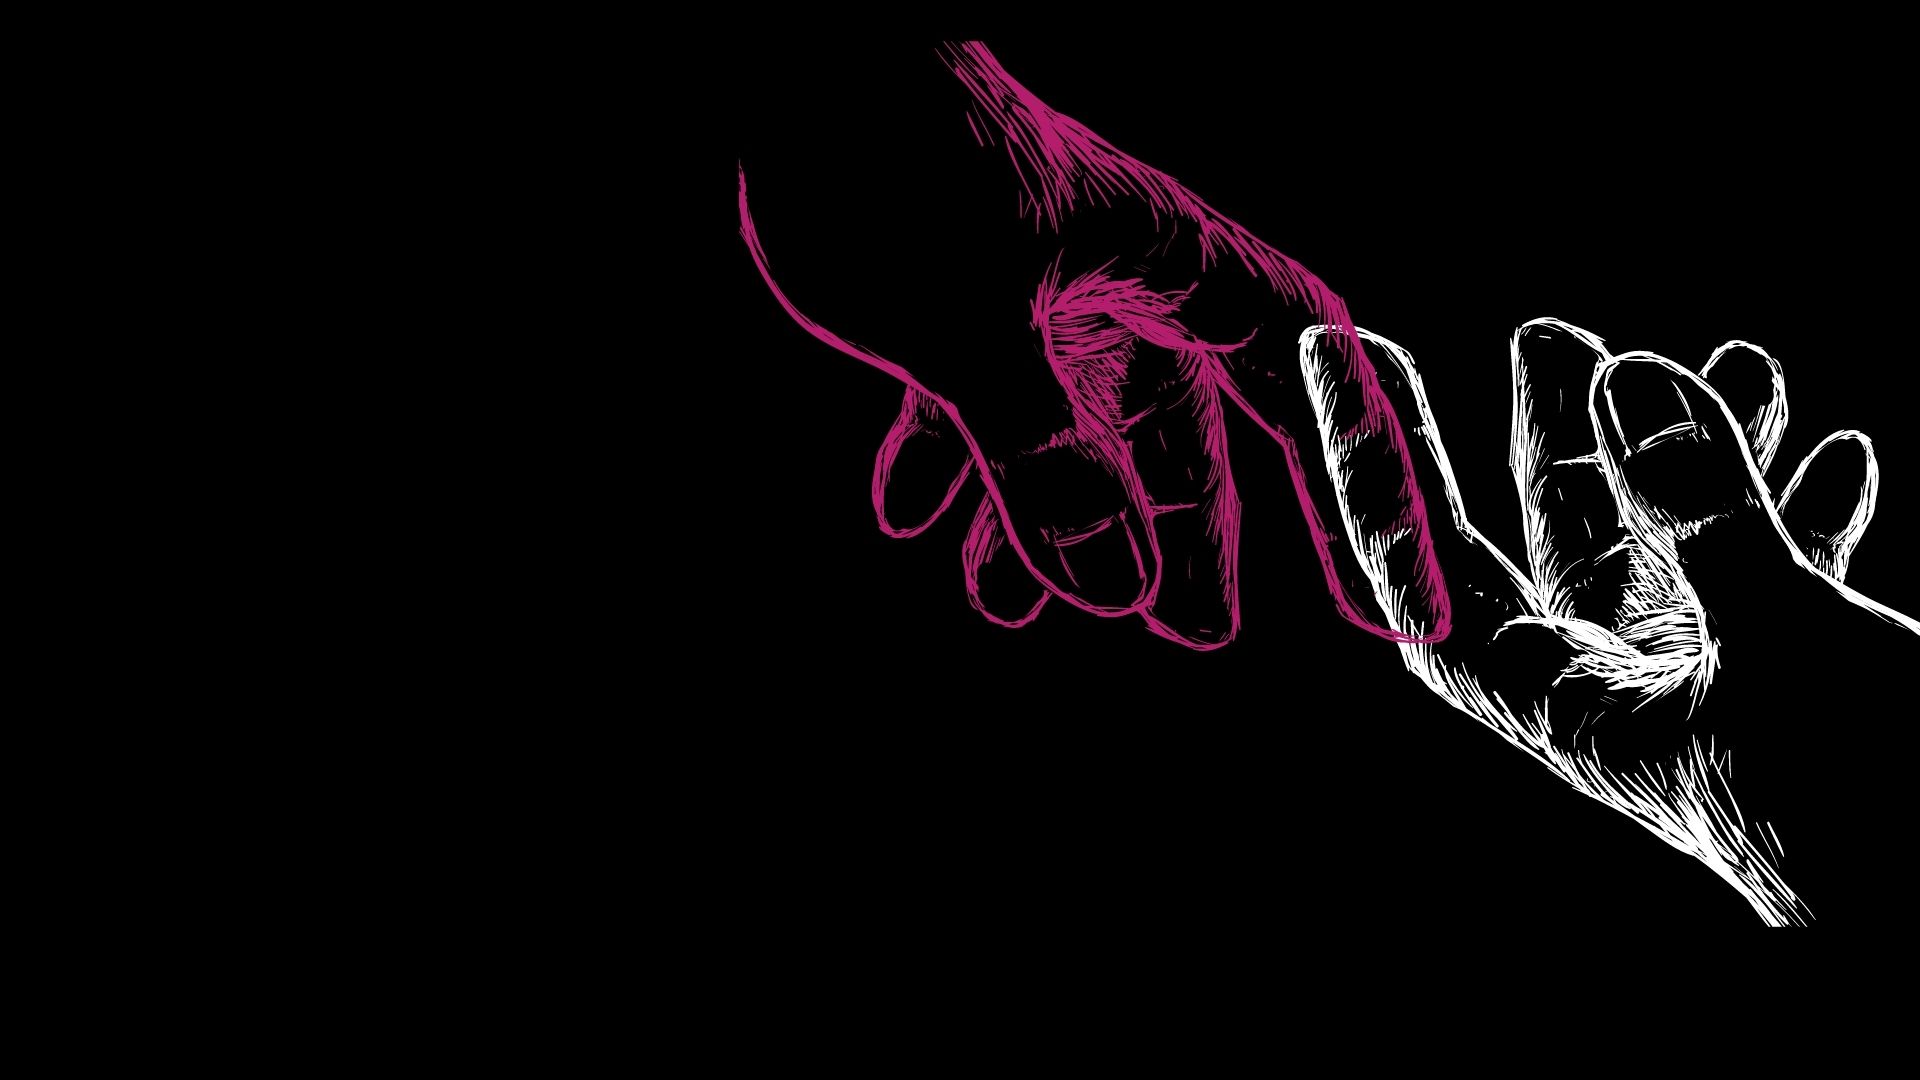 A graphic of a pink and white chalked hand reaching out to each other